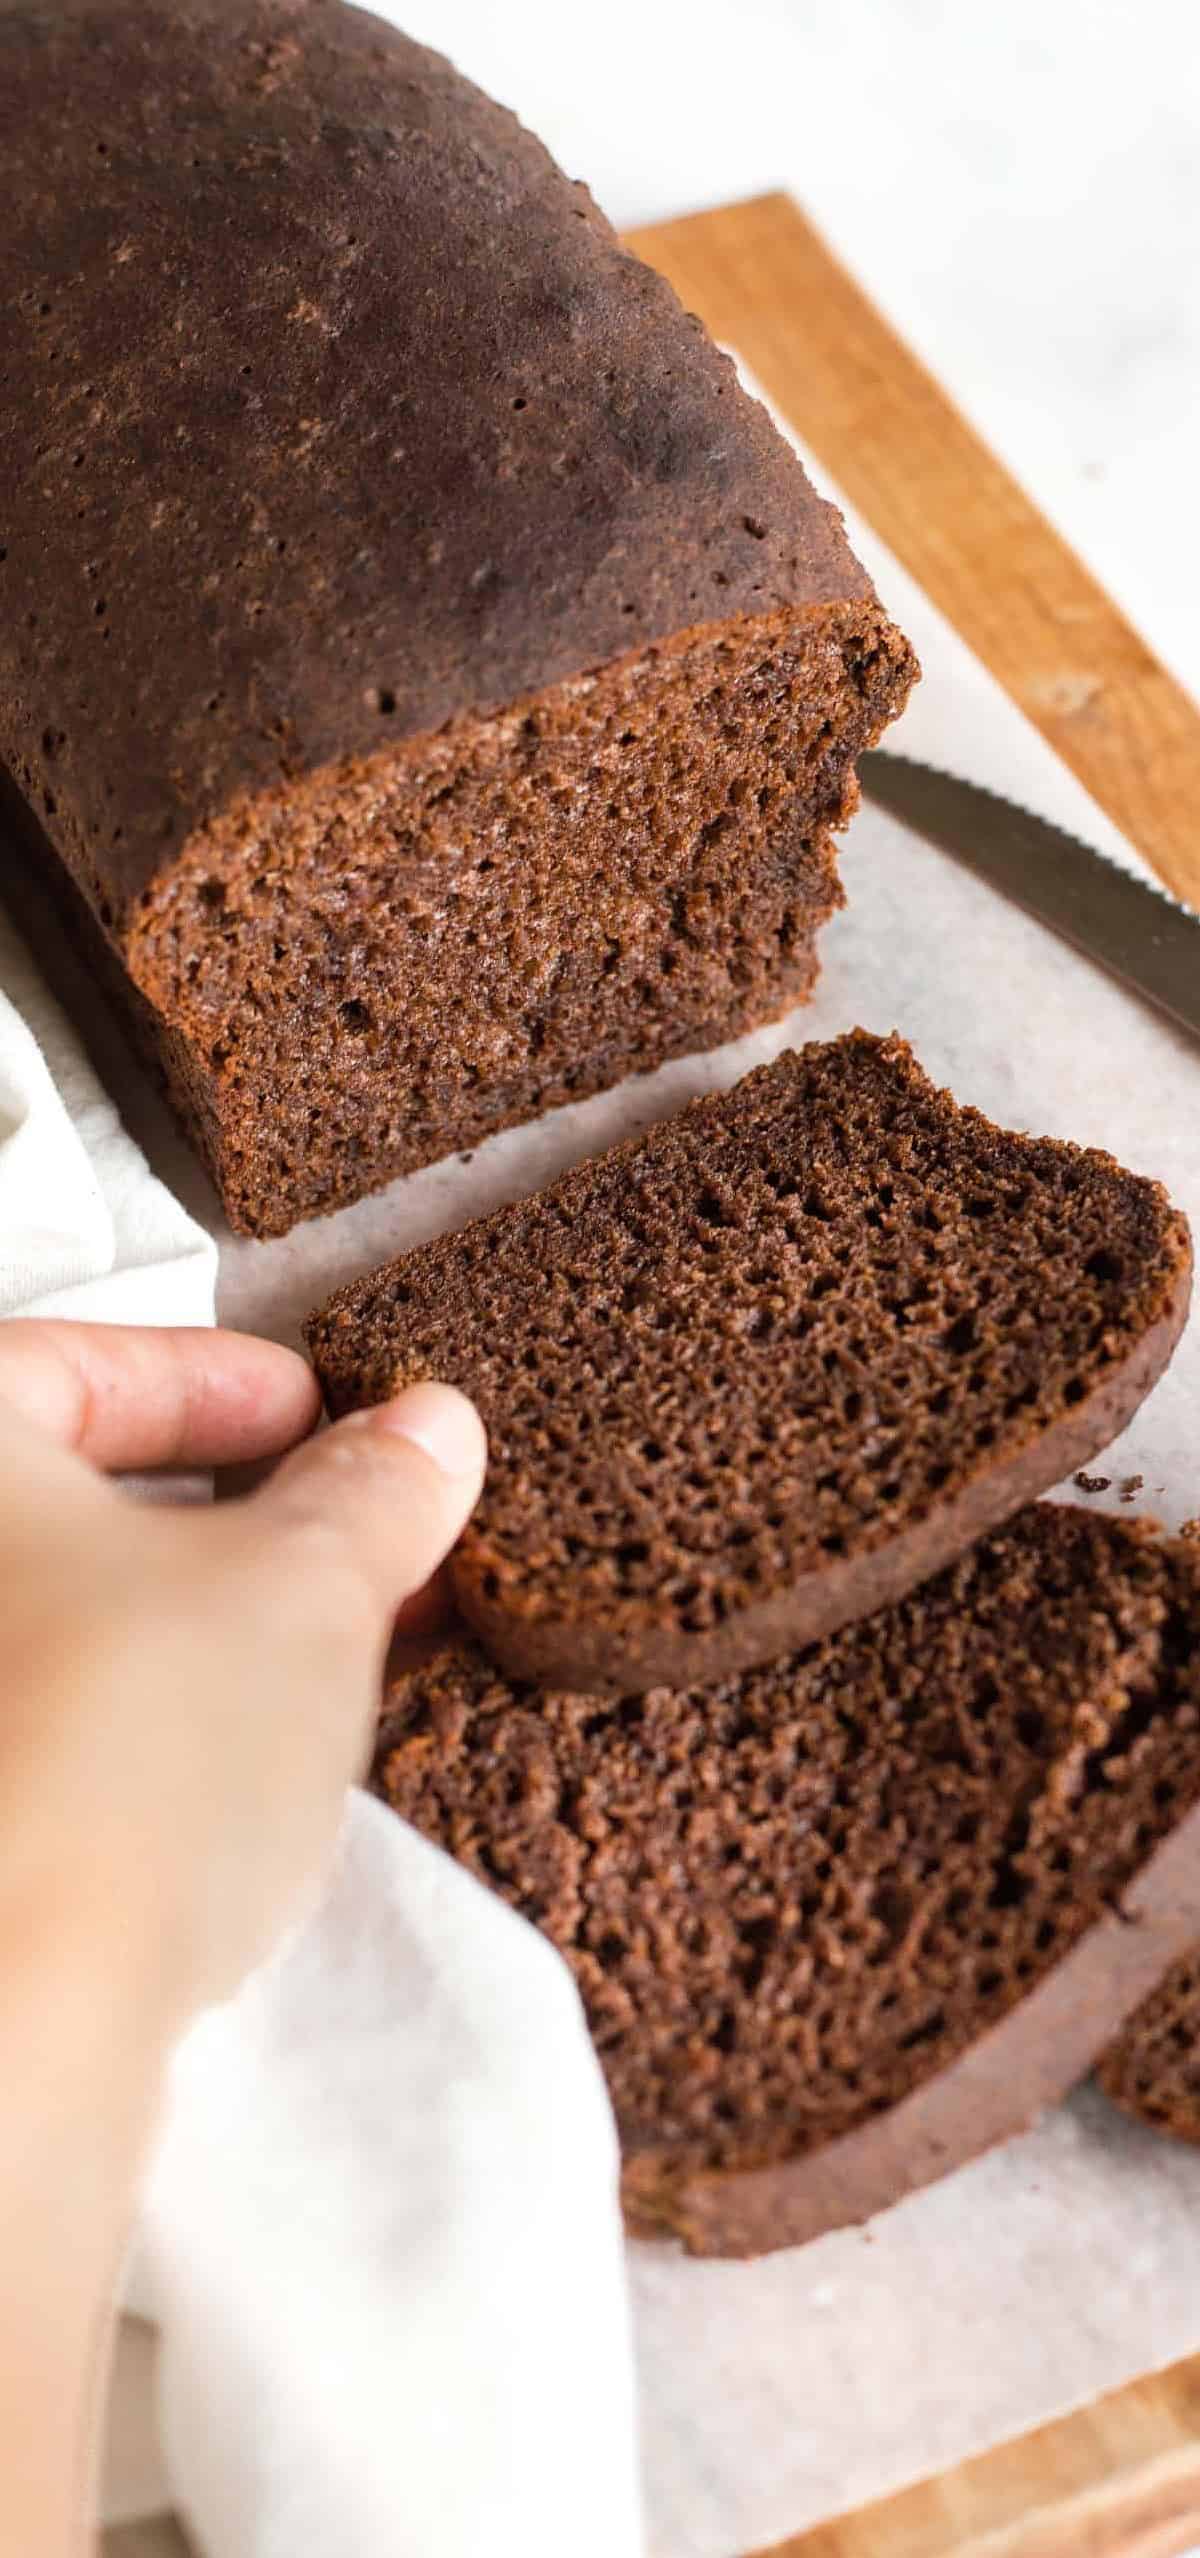  This bread has a rich flavor thanks to the combination of molasses, cocoa powder, and caraway seeds.